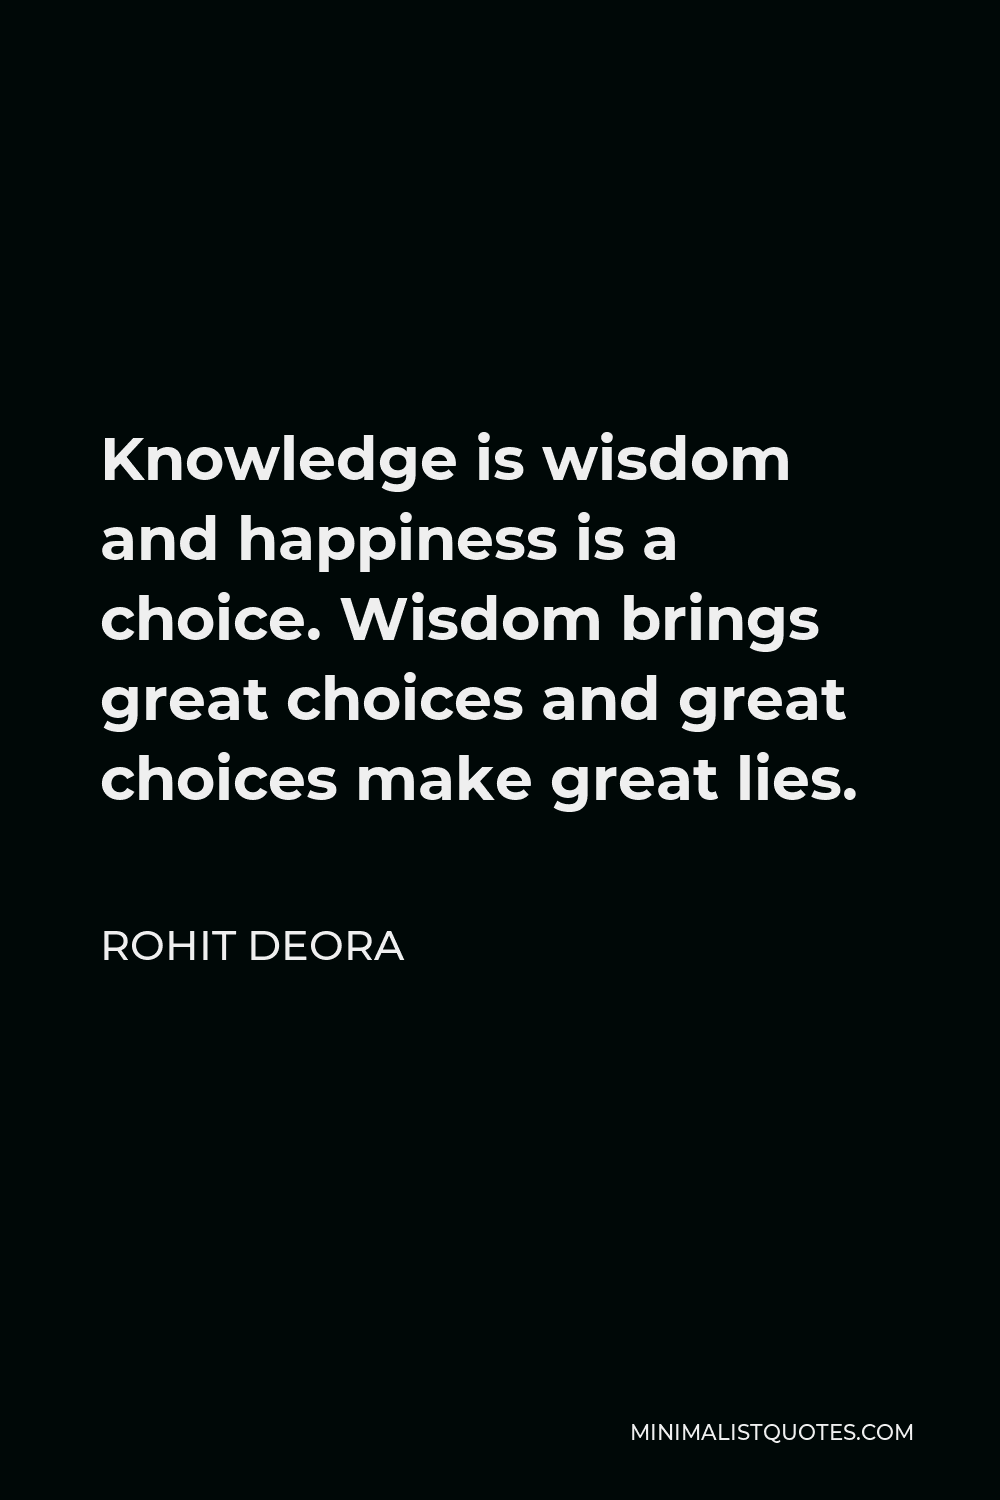 Rohit Deora Quote - Knowledge is wisdom and happiness is a choice. Wisdom brings great choices and great choices make great lies.